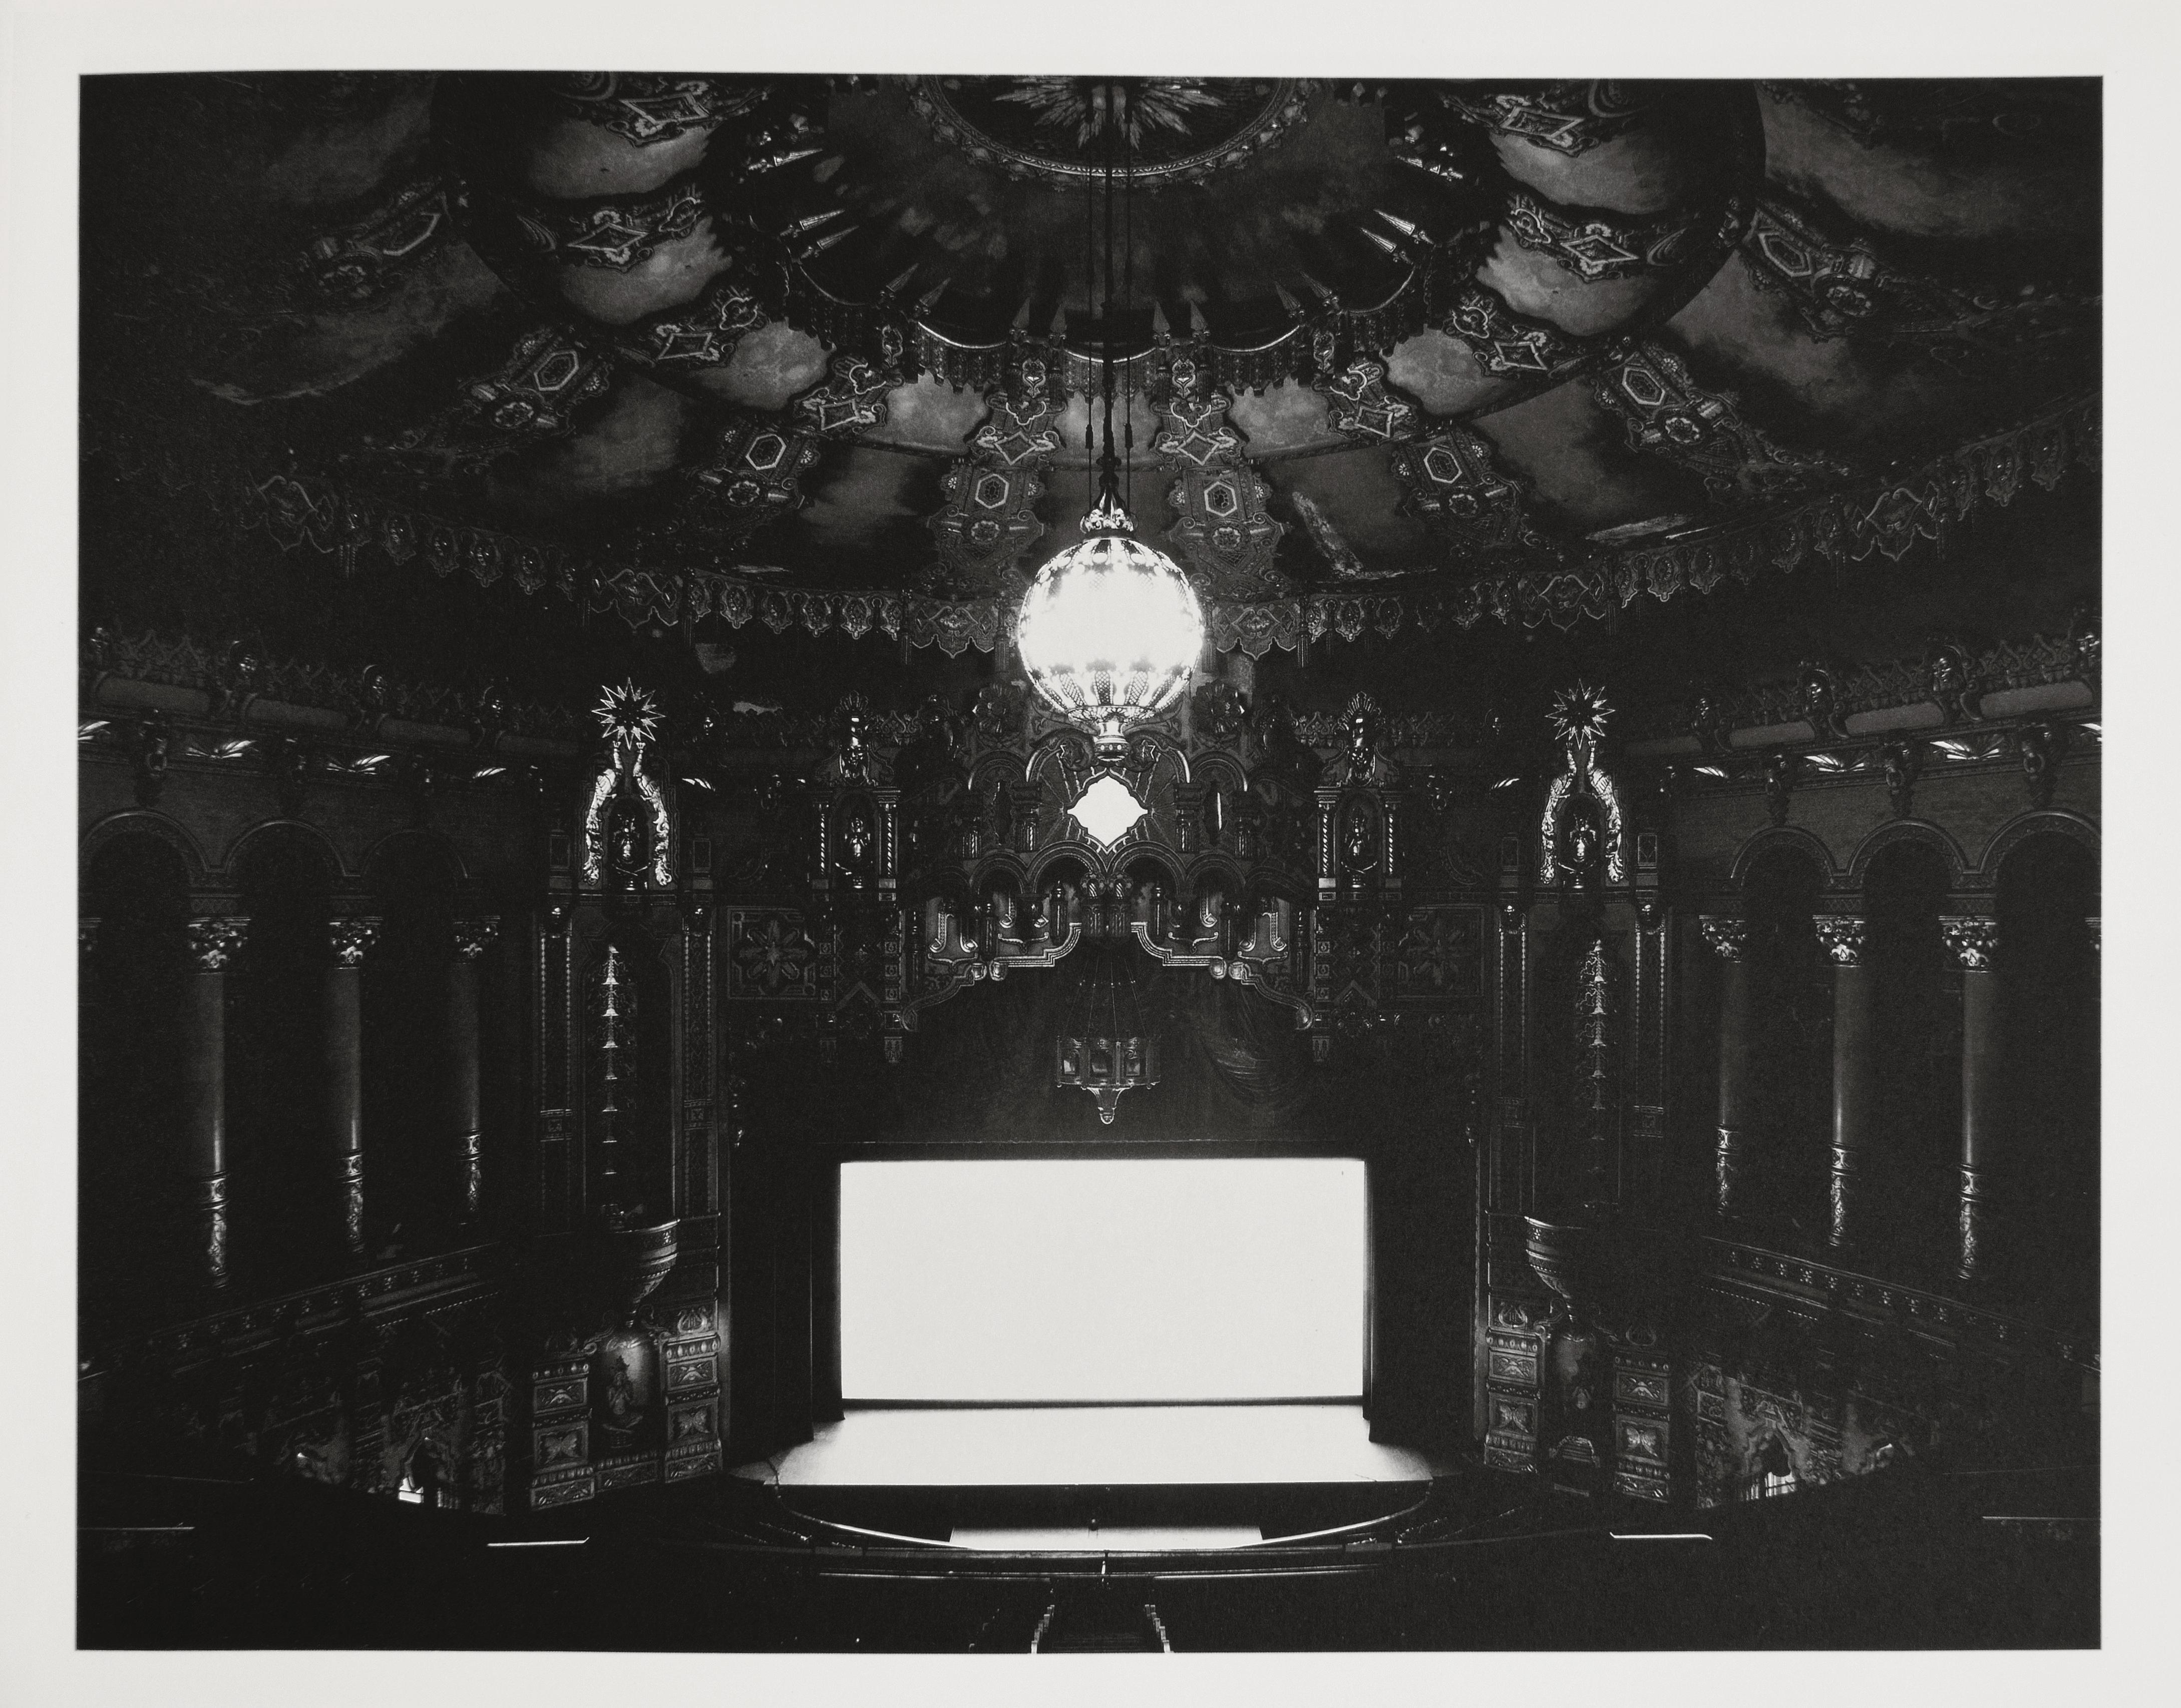 Hiroshi Sugimoto Black and White Photograph - Theaters by Hans Belting, 2001